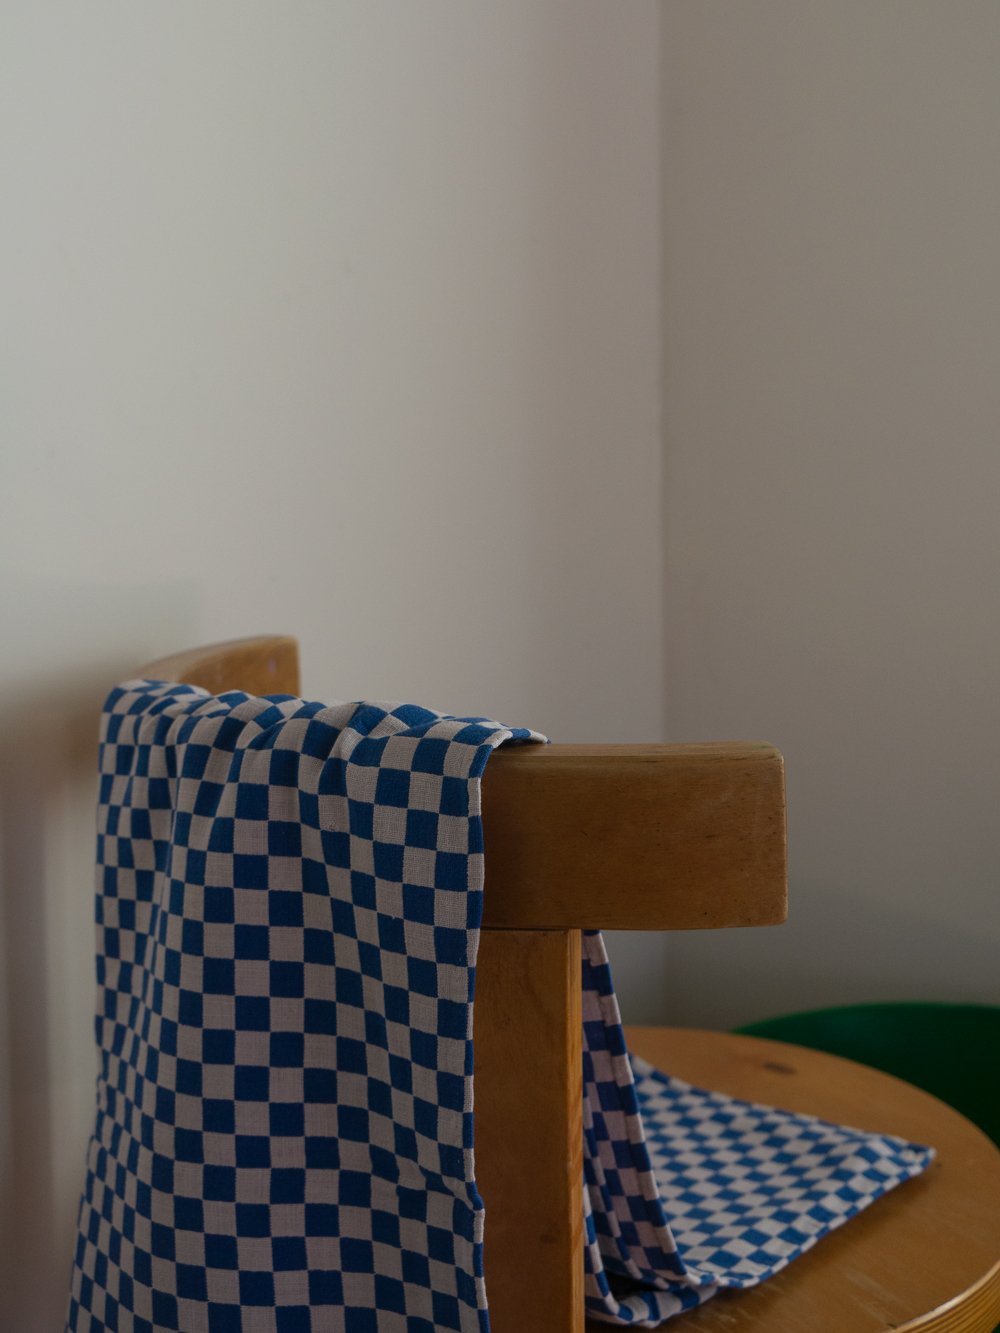 Image of check tablecloth